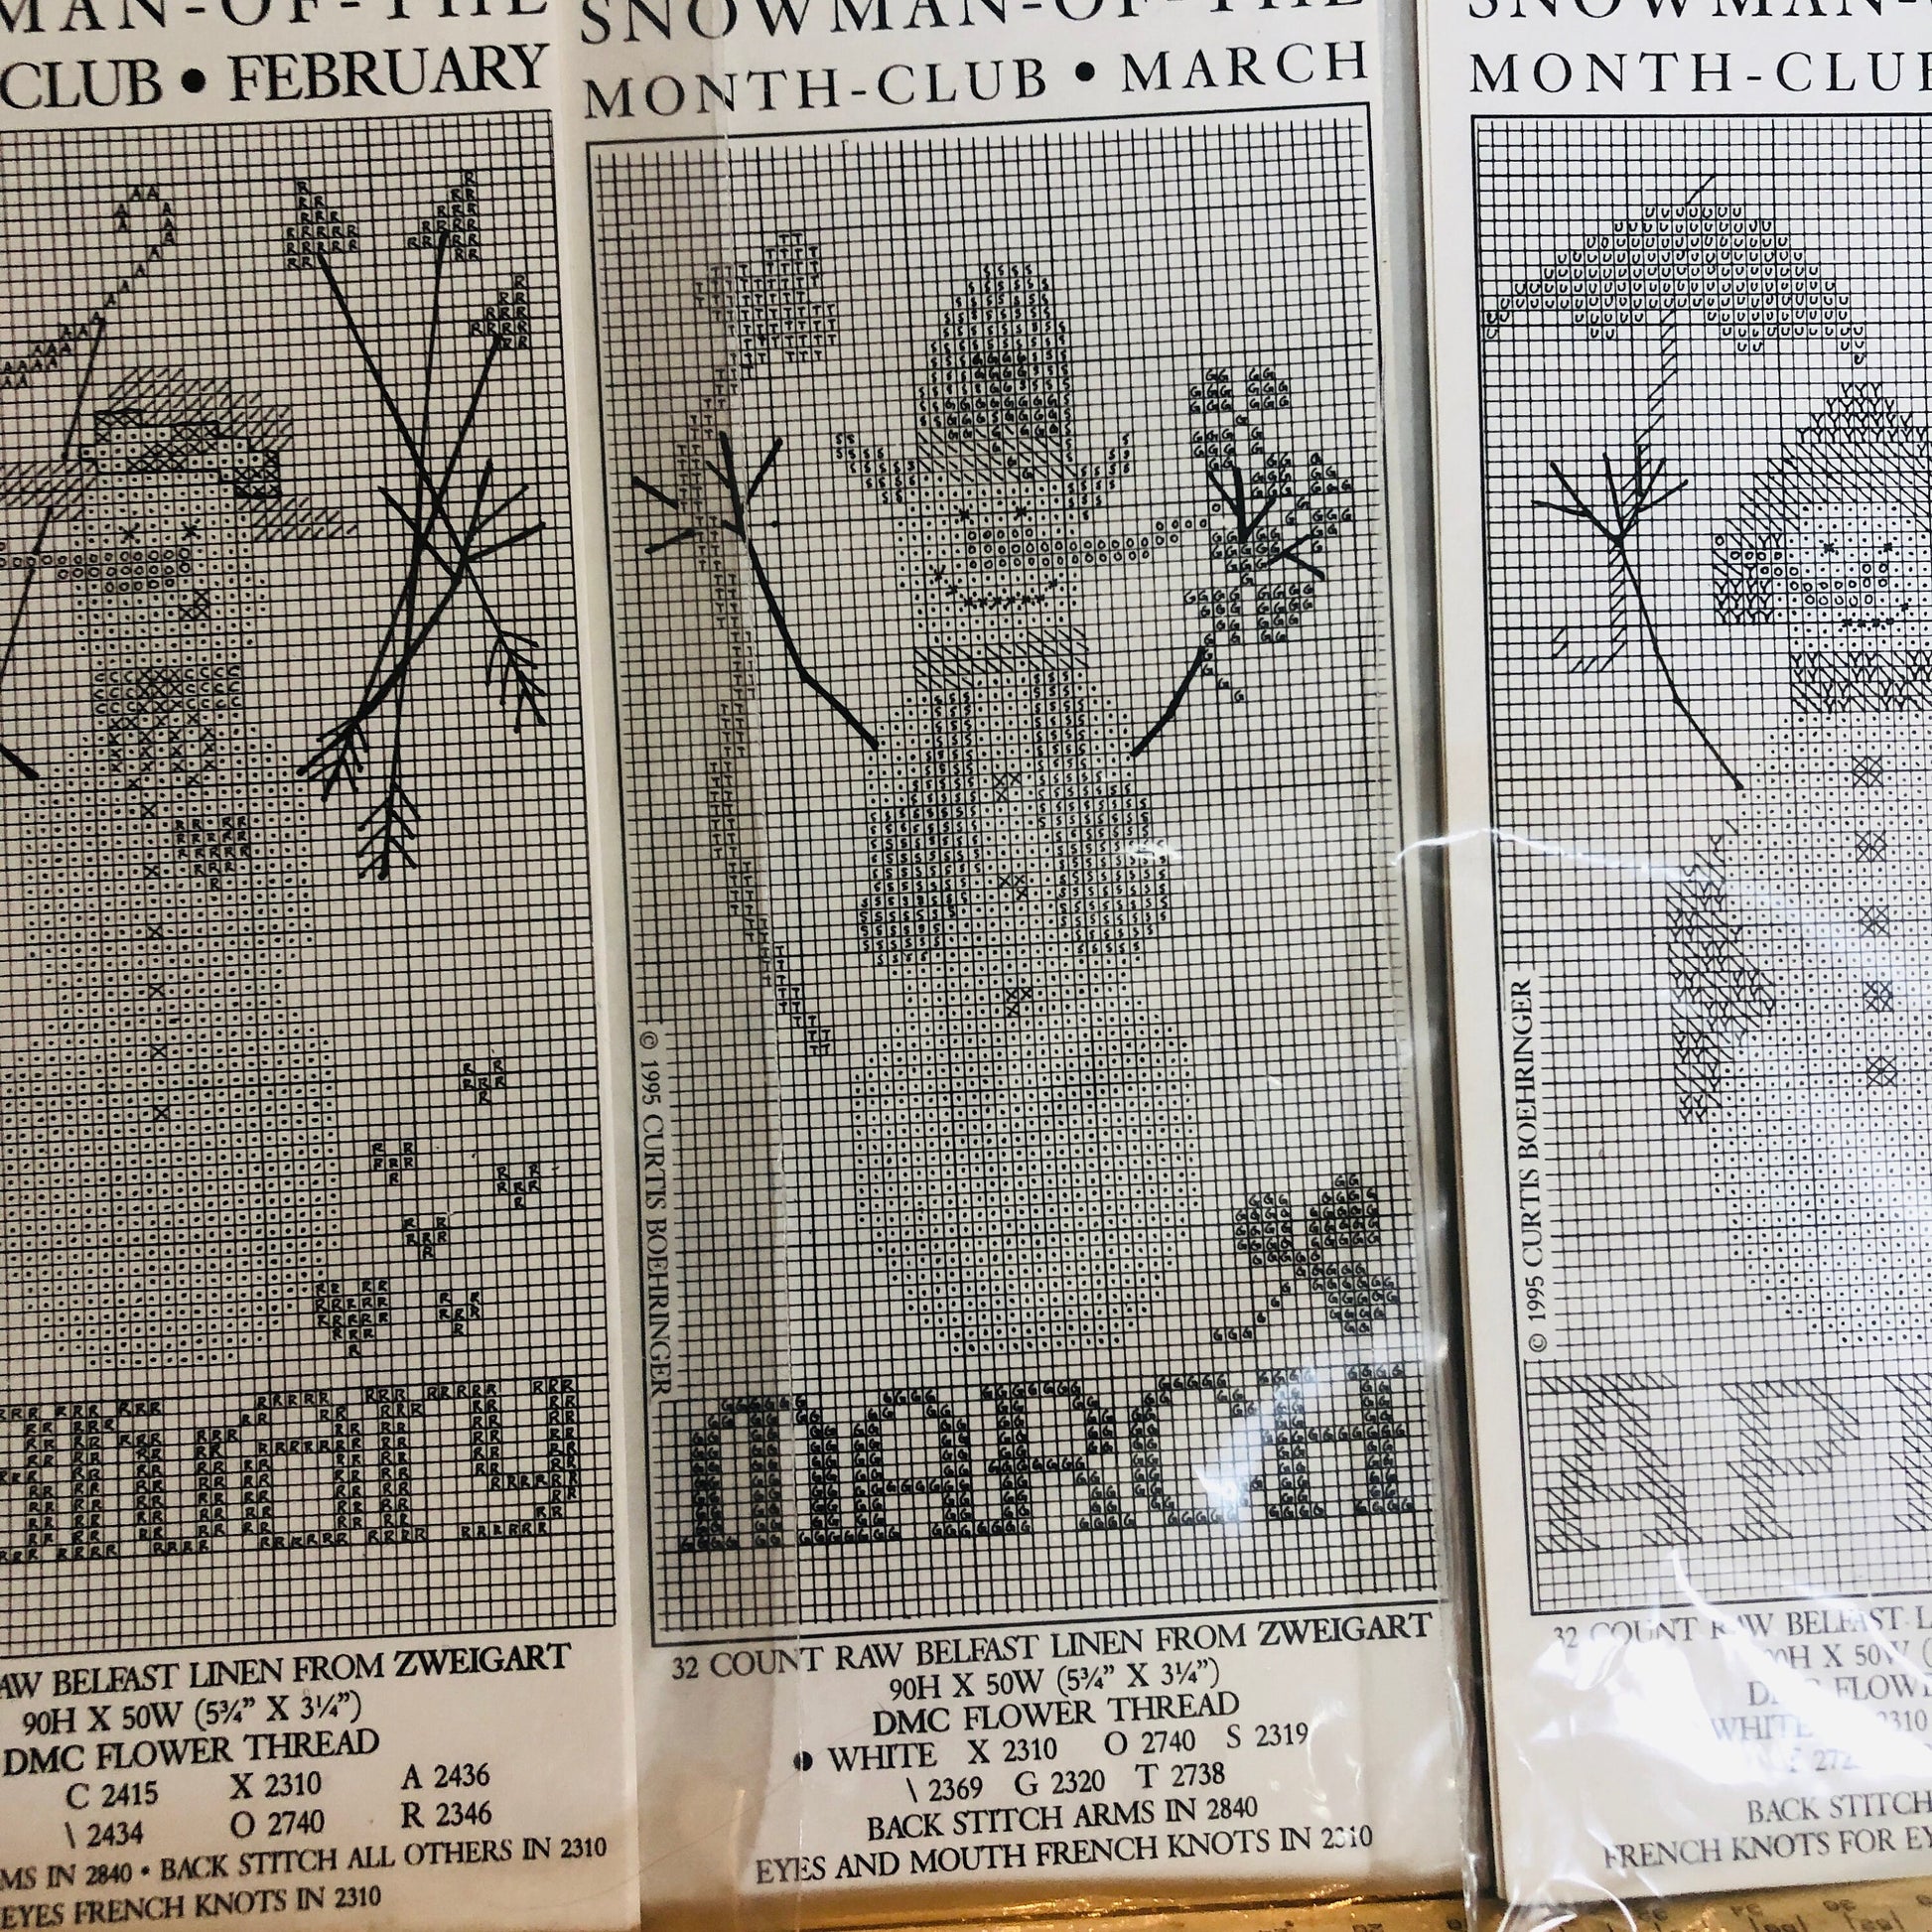 Curtis Boehringer, Choice Of Snowman Of The Month Club, Counted Cross Stitch Charts